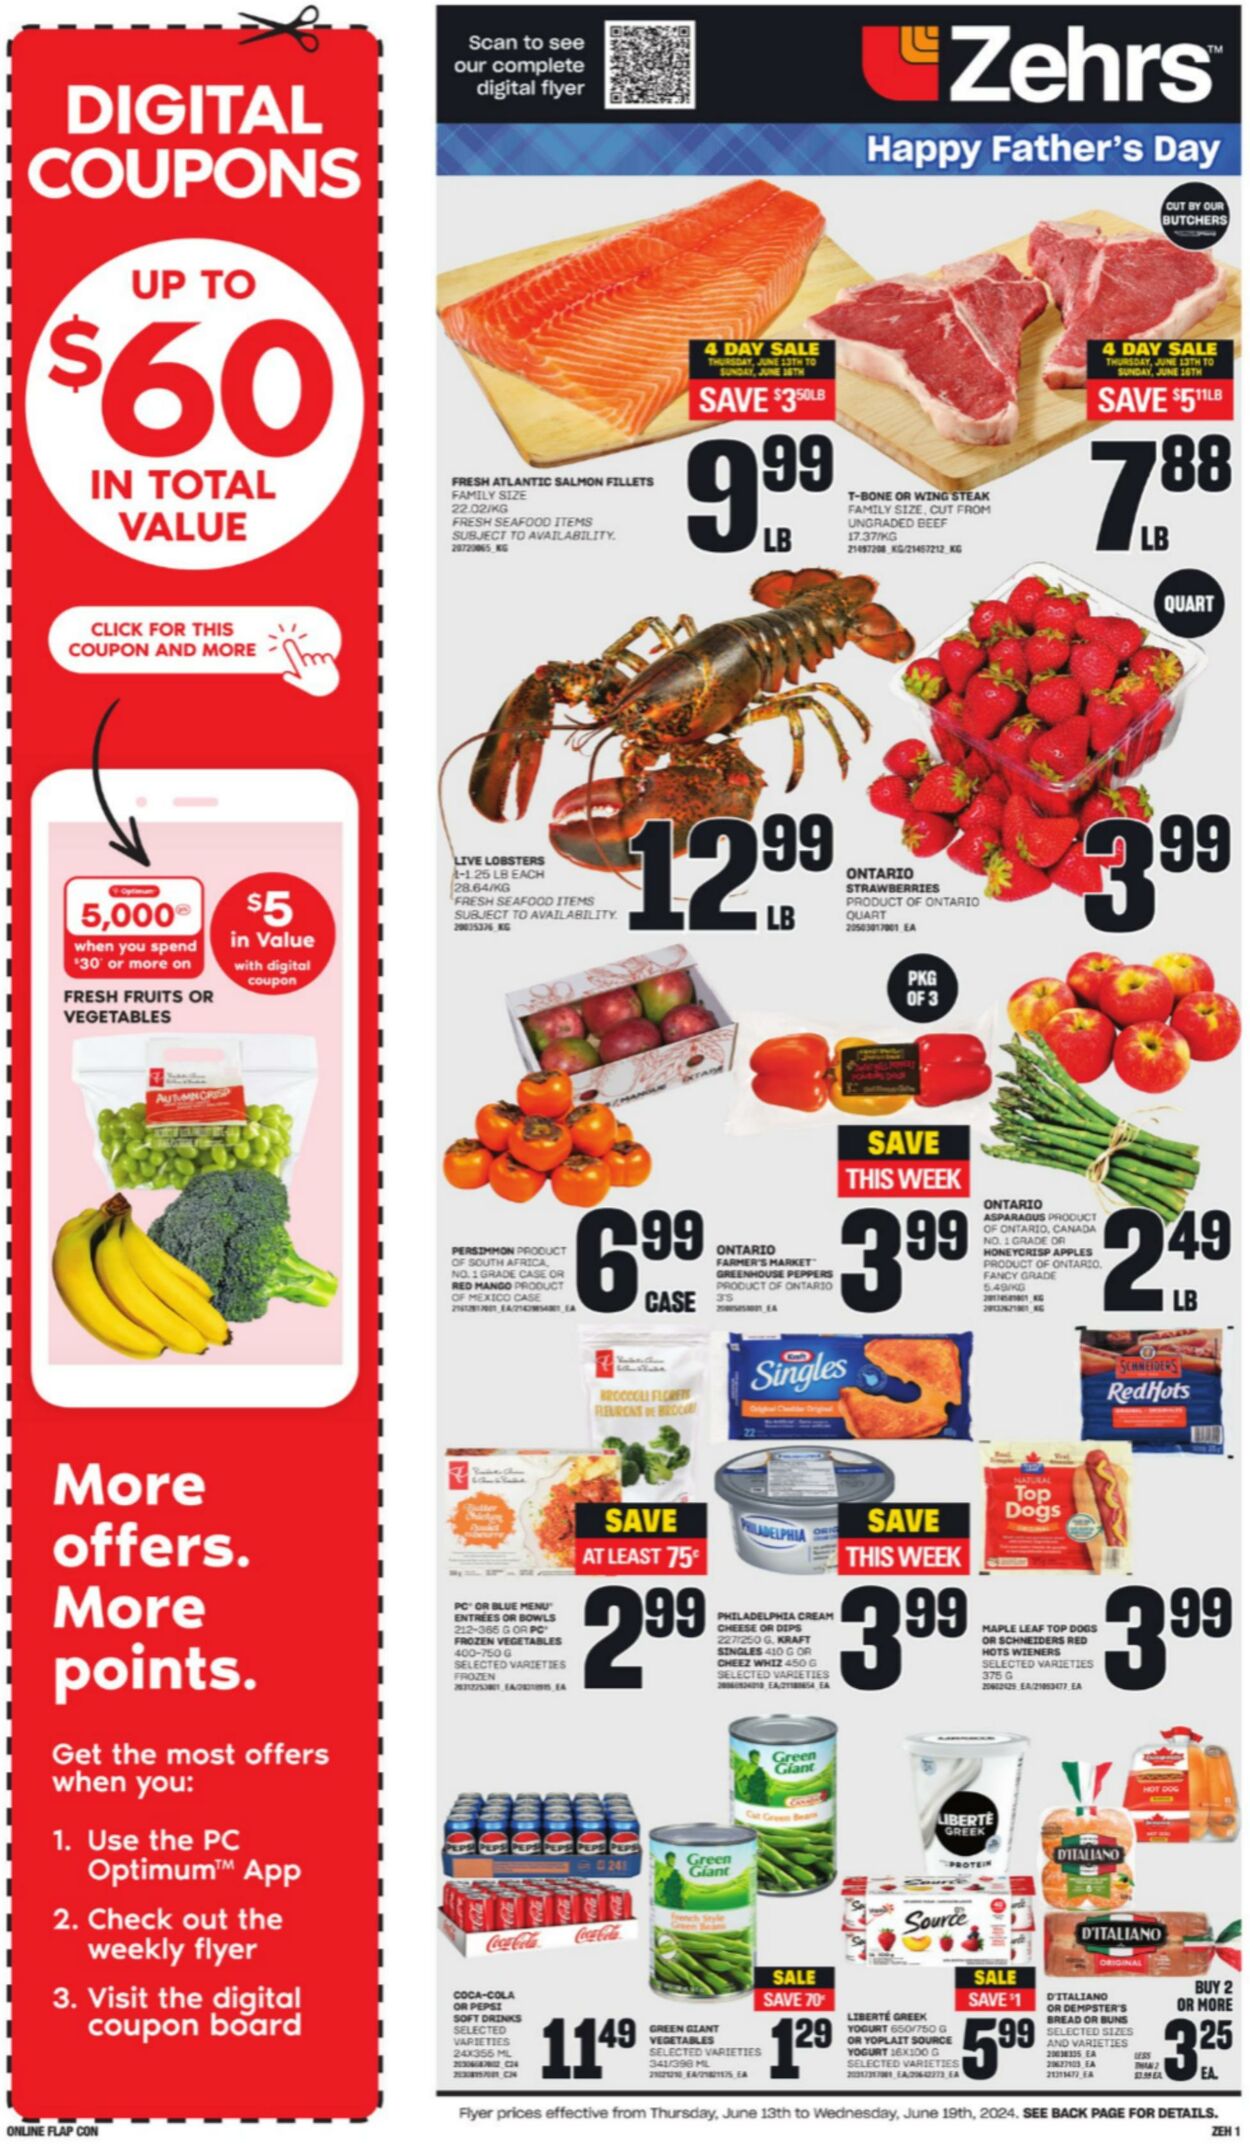 Zehrs Promotional flyers